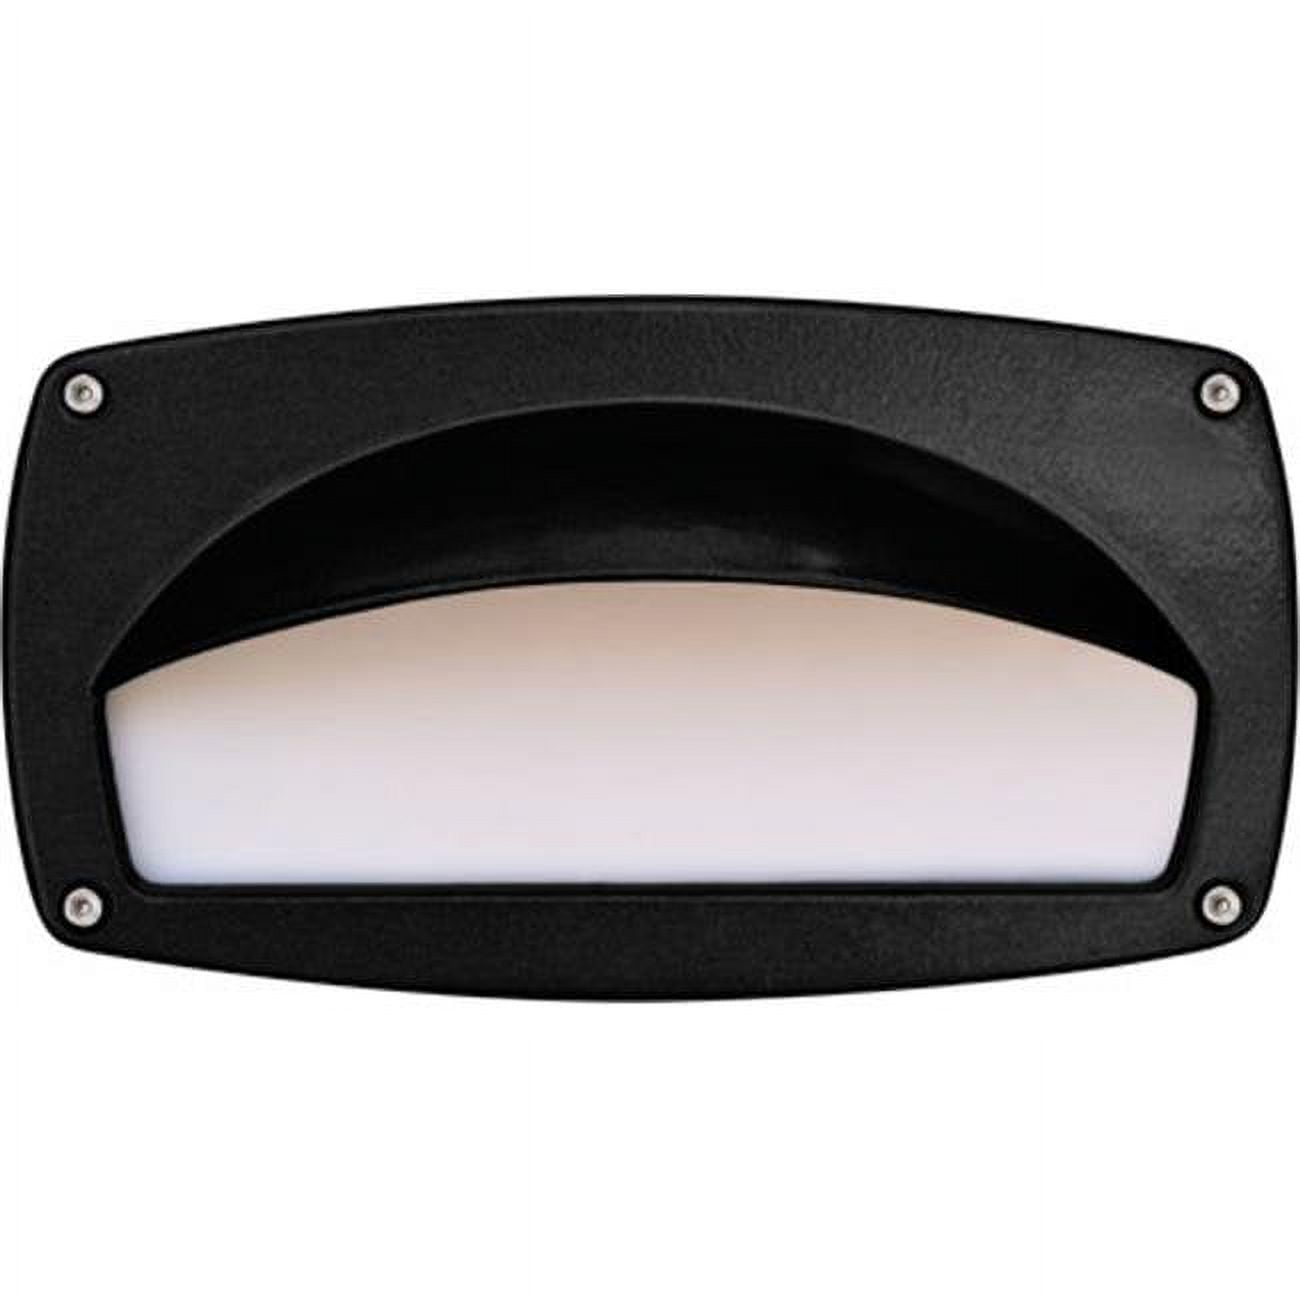 Picture of Dabmar Lighting DSL1014-B Recessed Hooded Brick, Step & Wall Light, Black - 4.95 x 9 x 3.80 in.